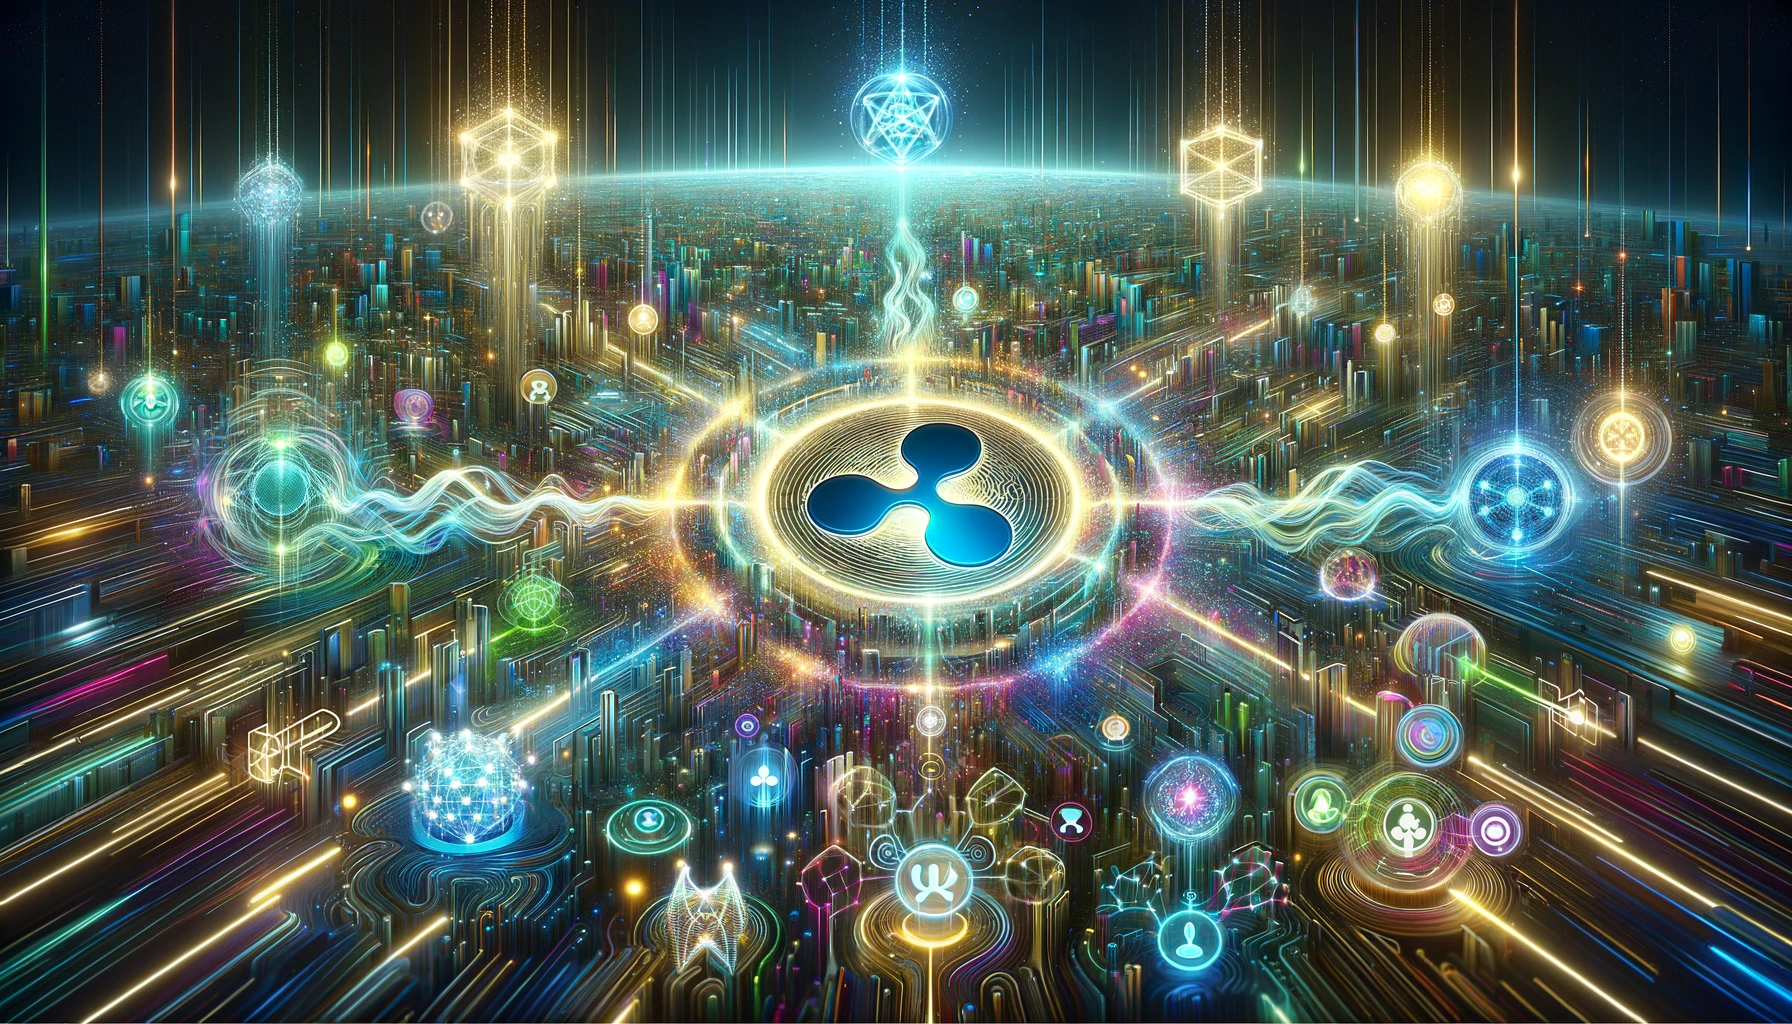 Ripple’s XRPL Gears Up for a Transformative Leap with AMM Upgrade